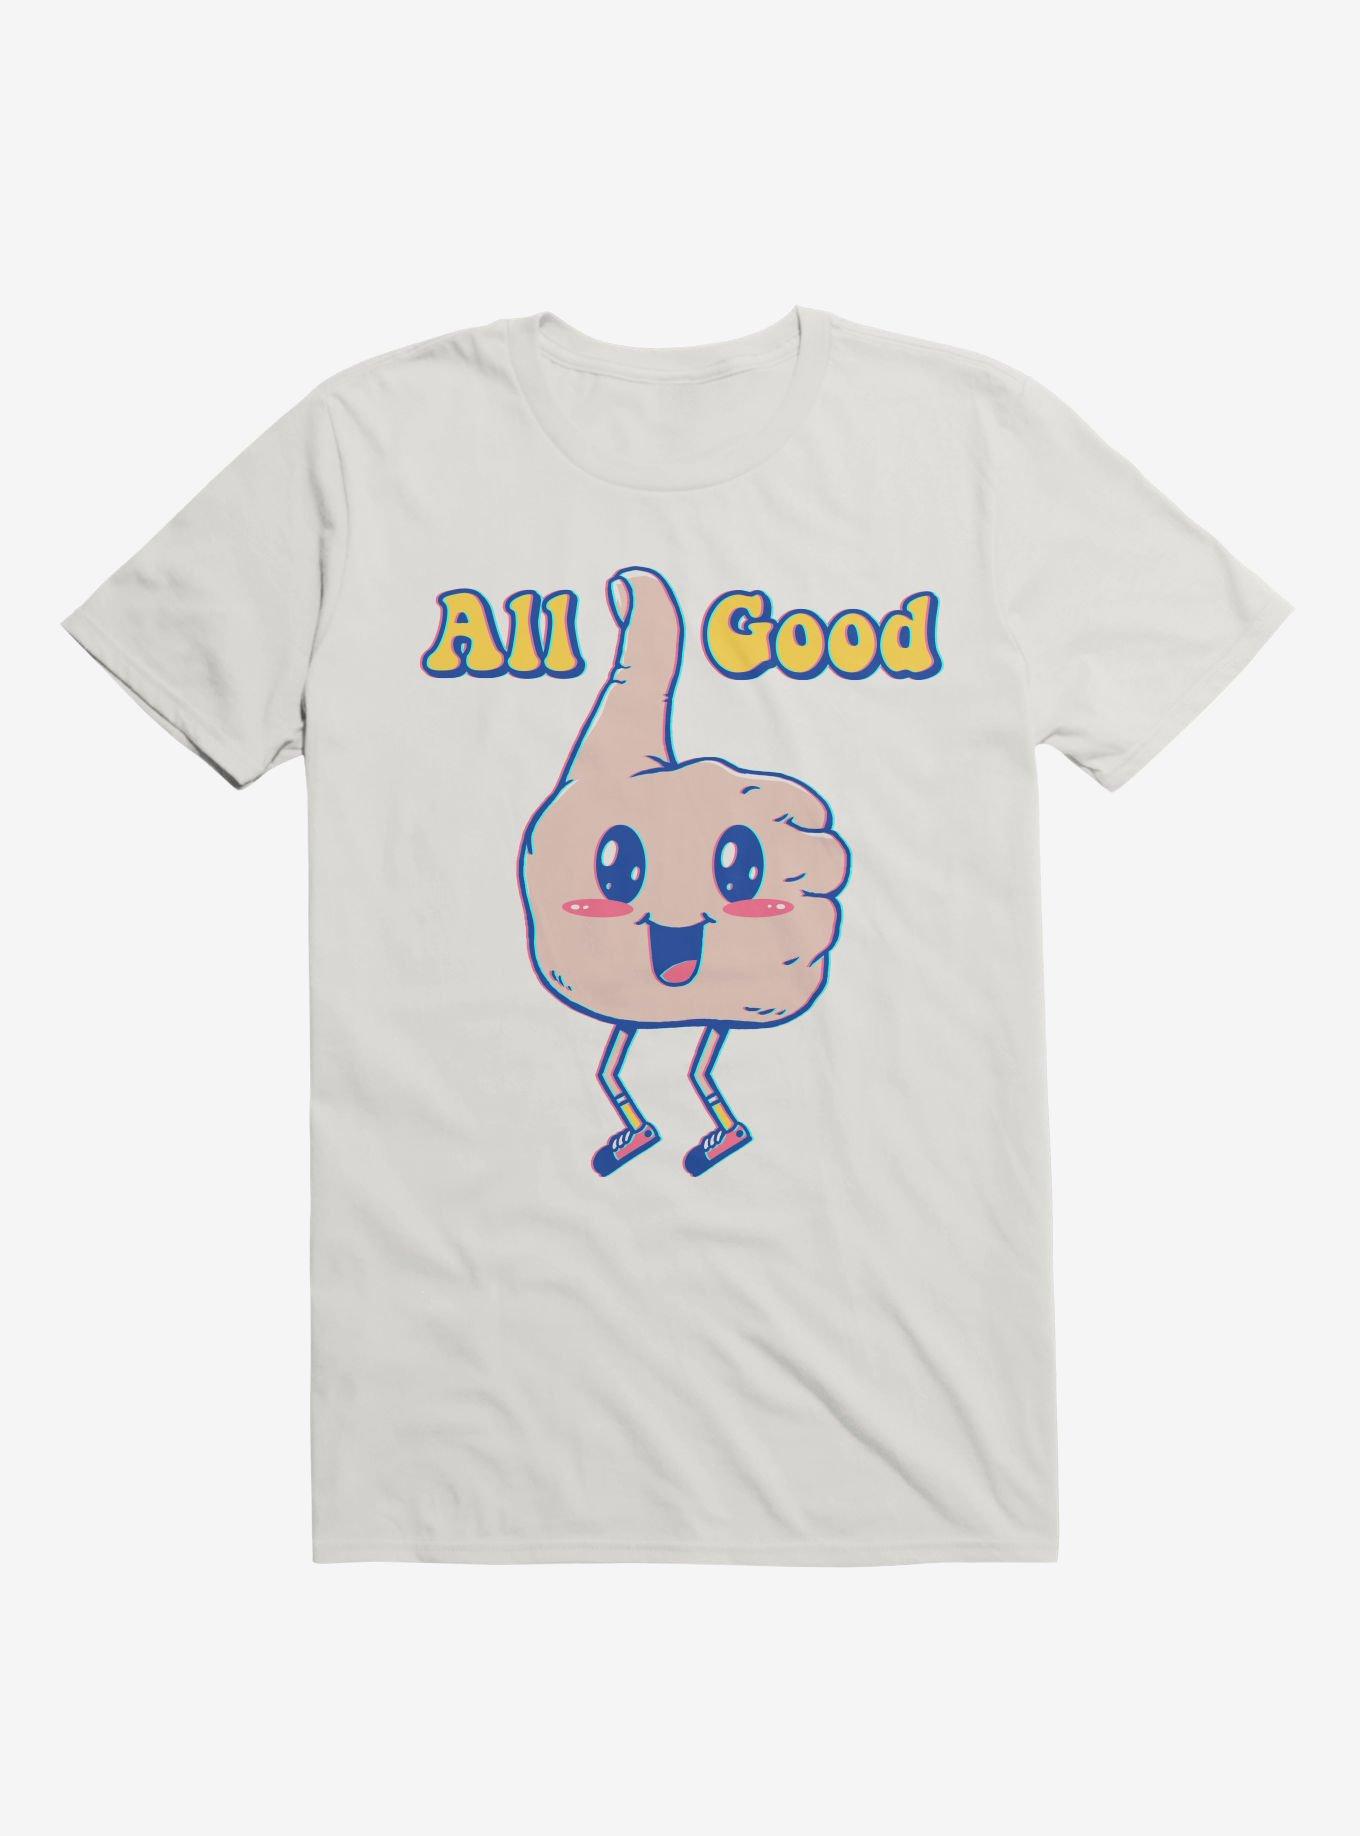 It's All Good Thumbs Up White T-Shirt, WHITE, hi-res